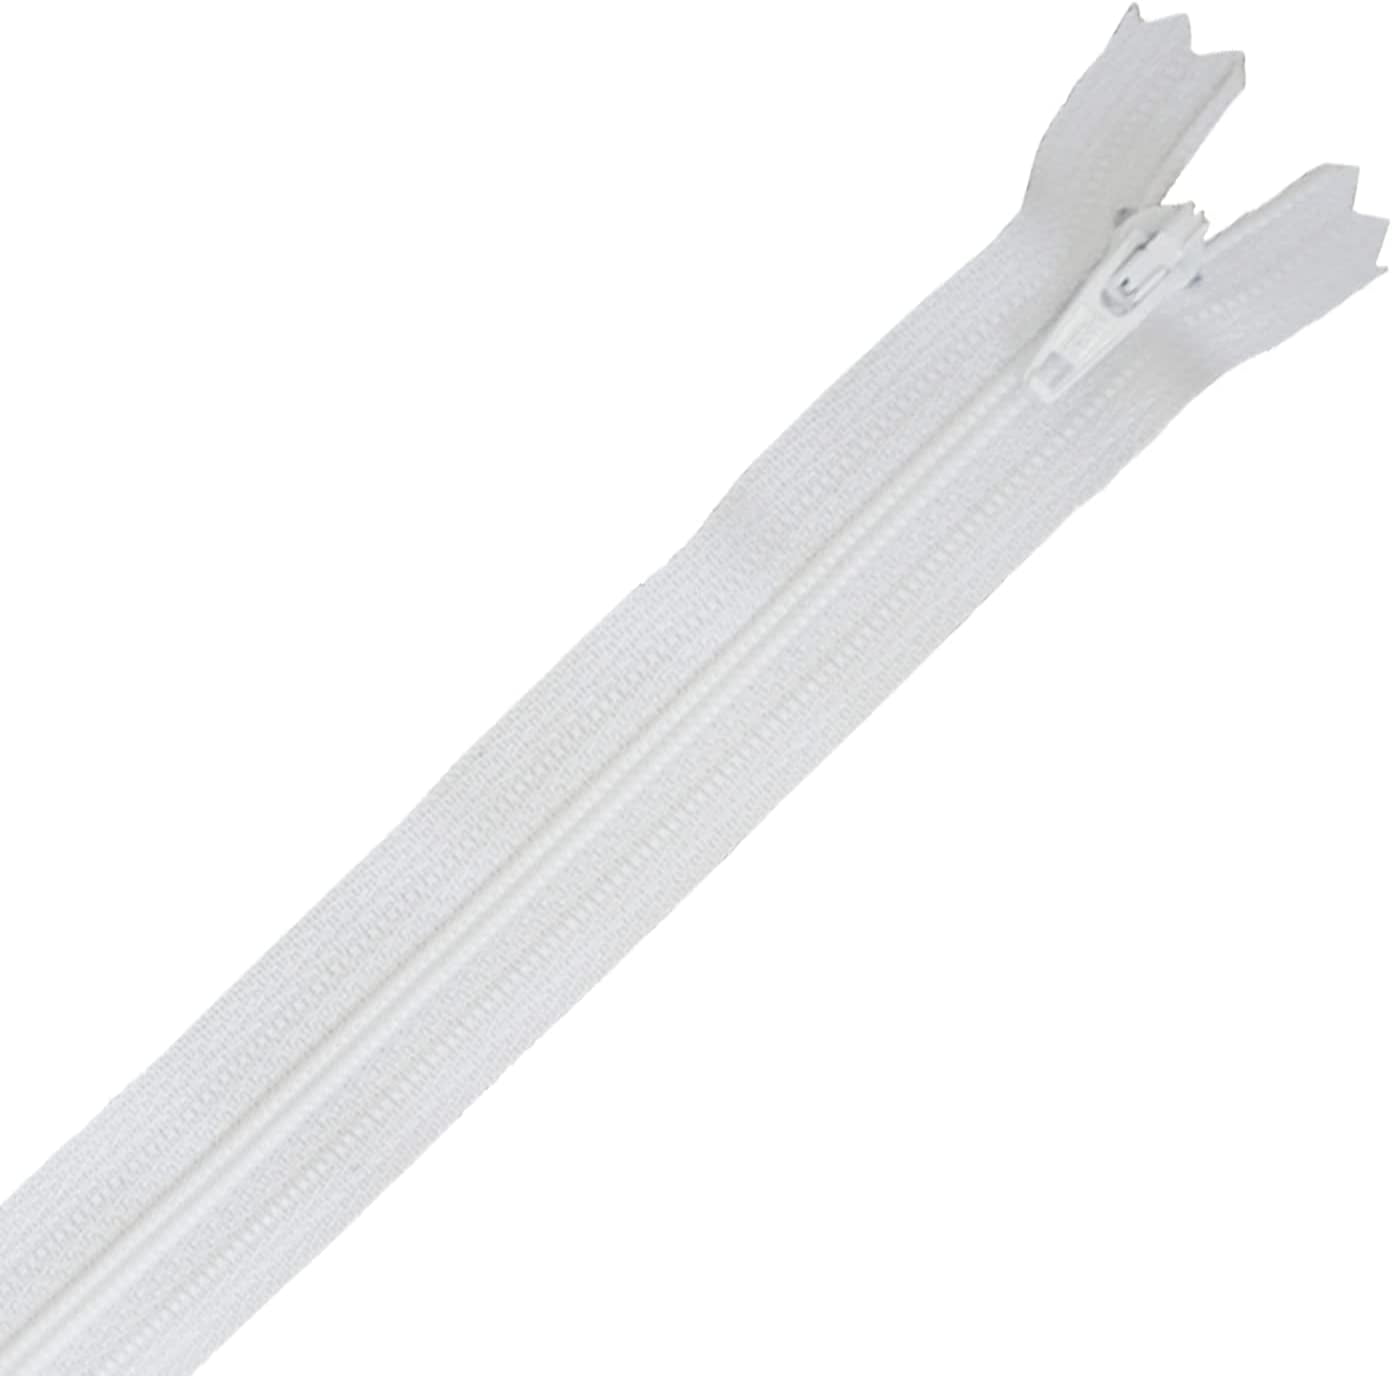 Invisible Zipper White Zipper 16 inch Zippers for Sewing Invisible White Zipper 16” DIY Zippers Supplies for Tailor Sewing Crafts